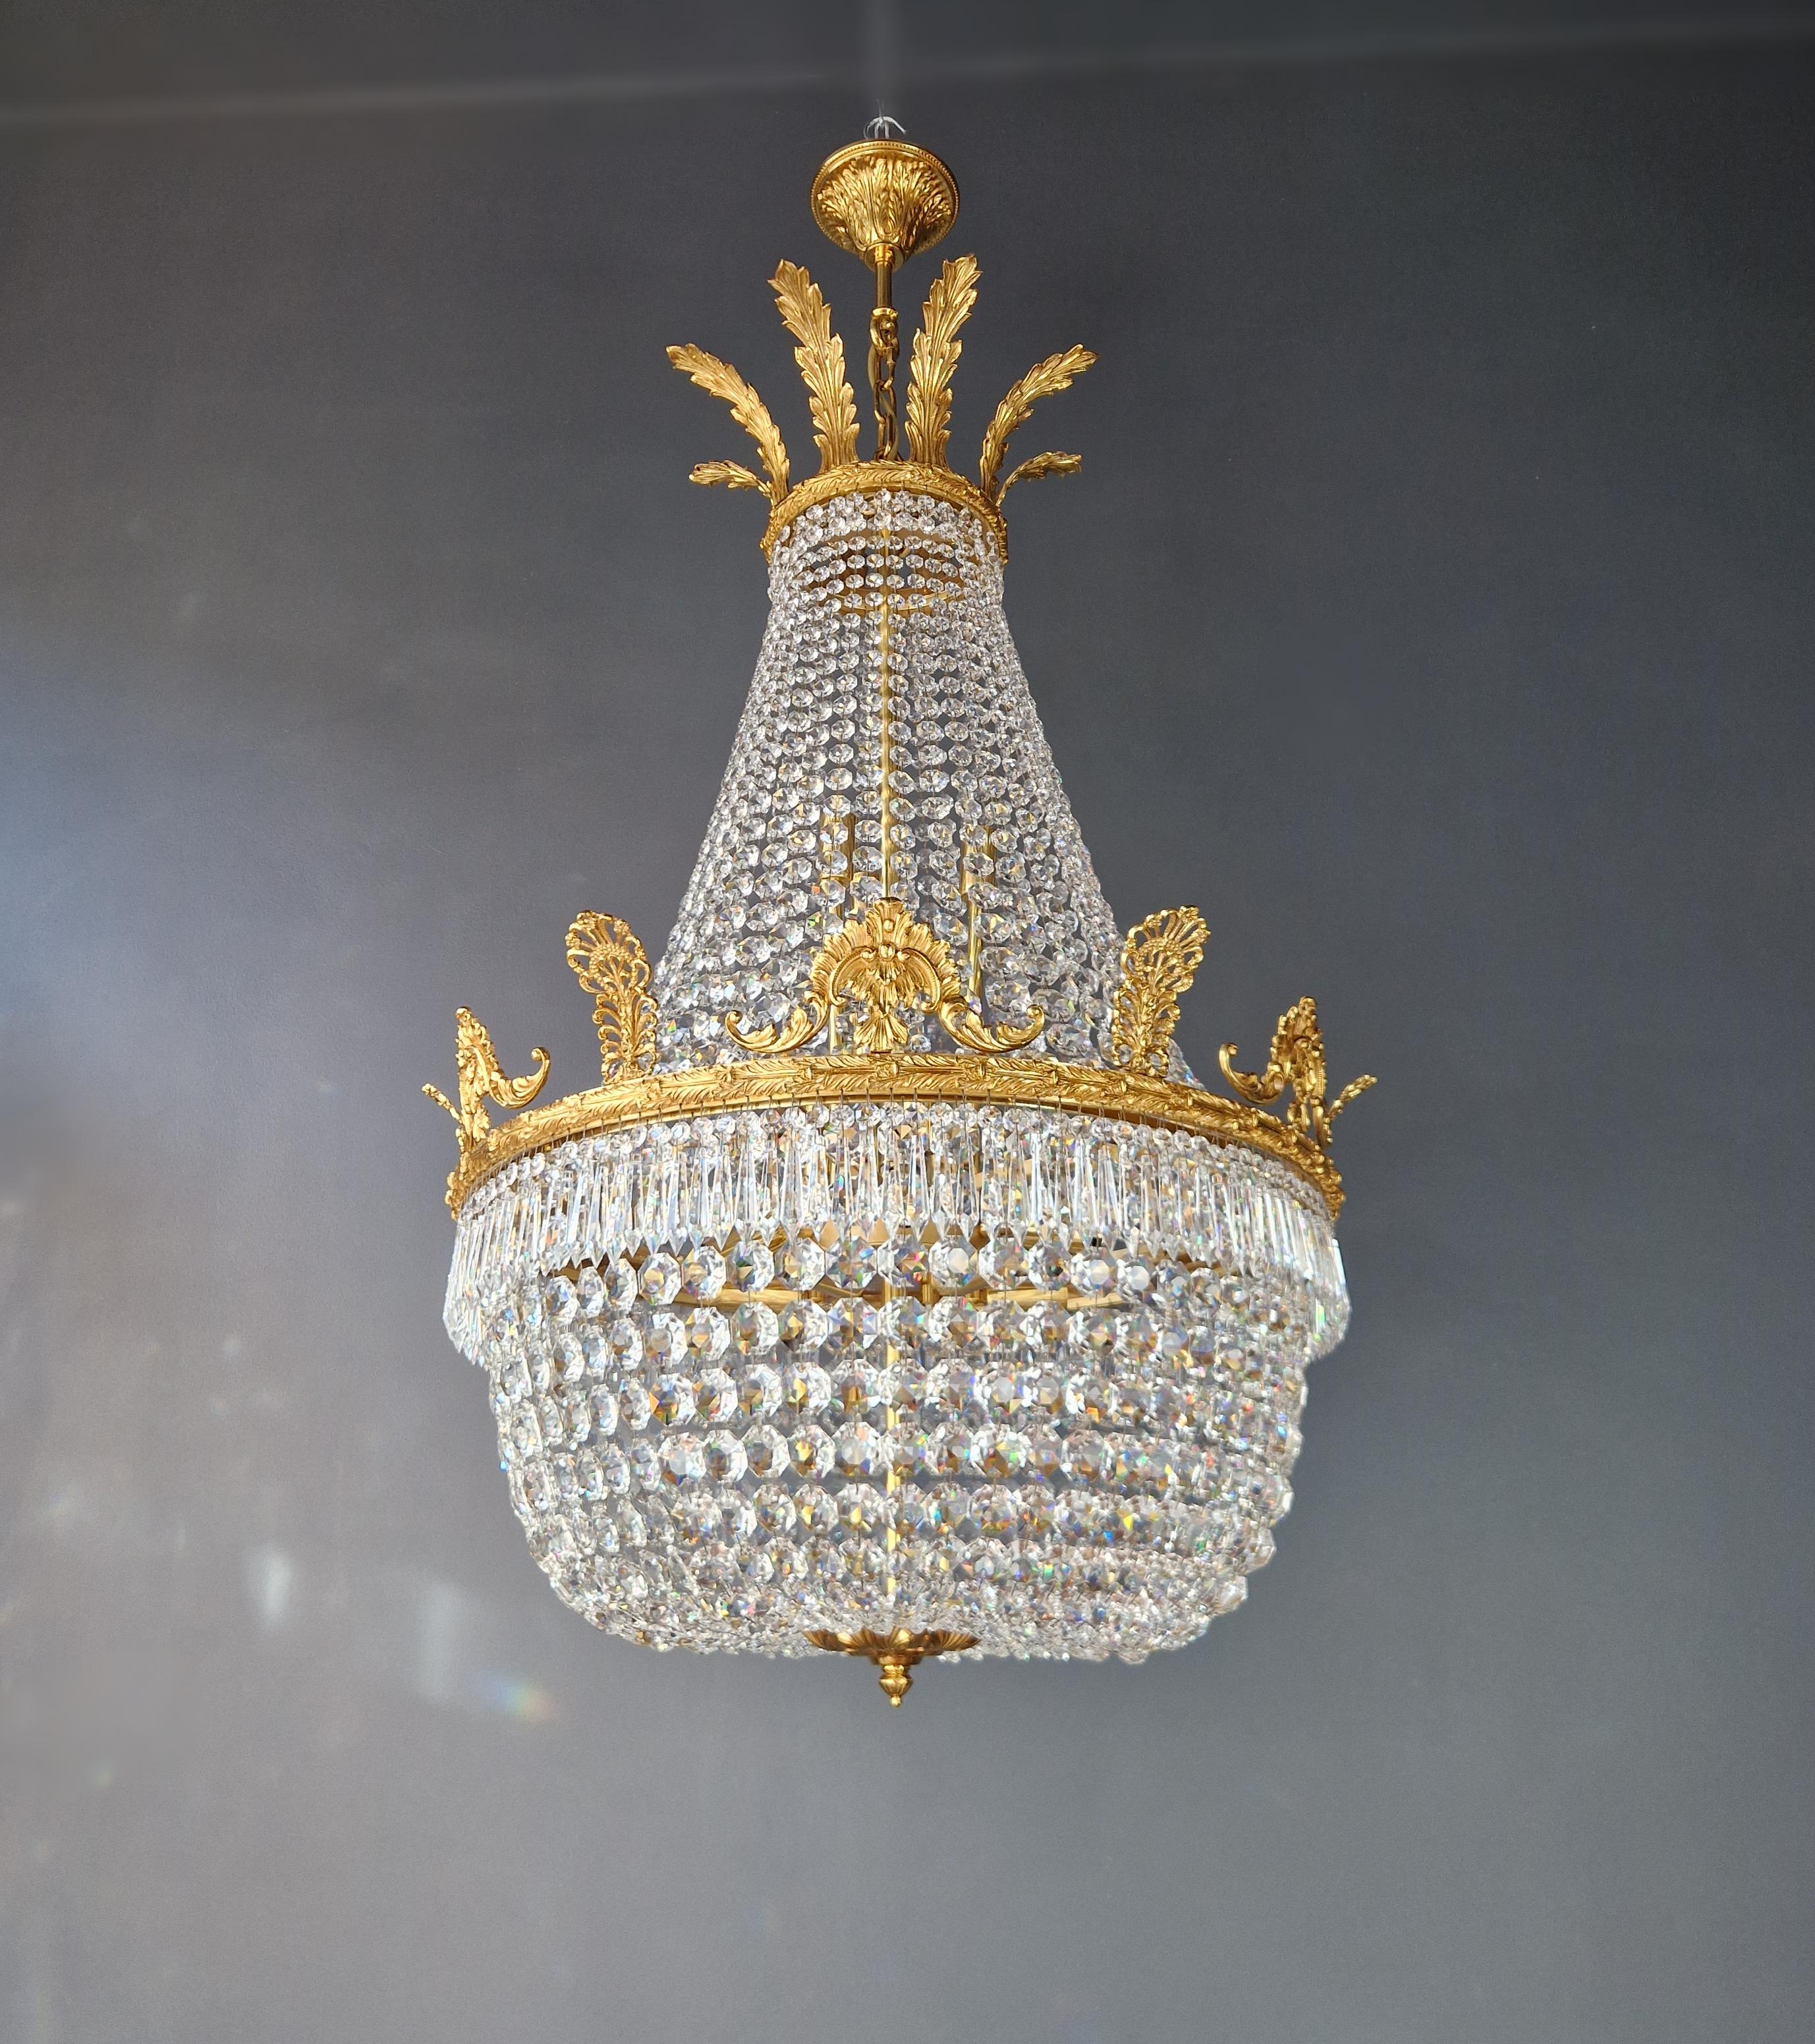 Hand-Knotted Brass Basket Empire Sac a Pearl Chandelier Crystal Lustre Lamp Antique Gold For Sale